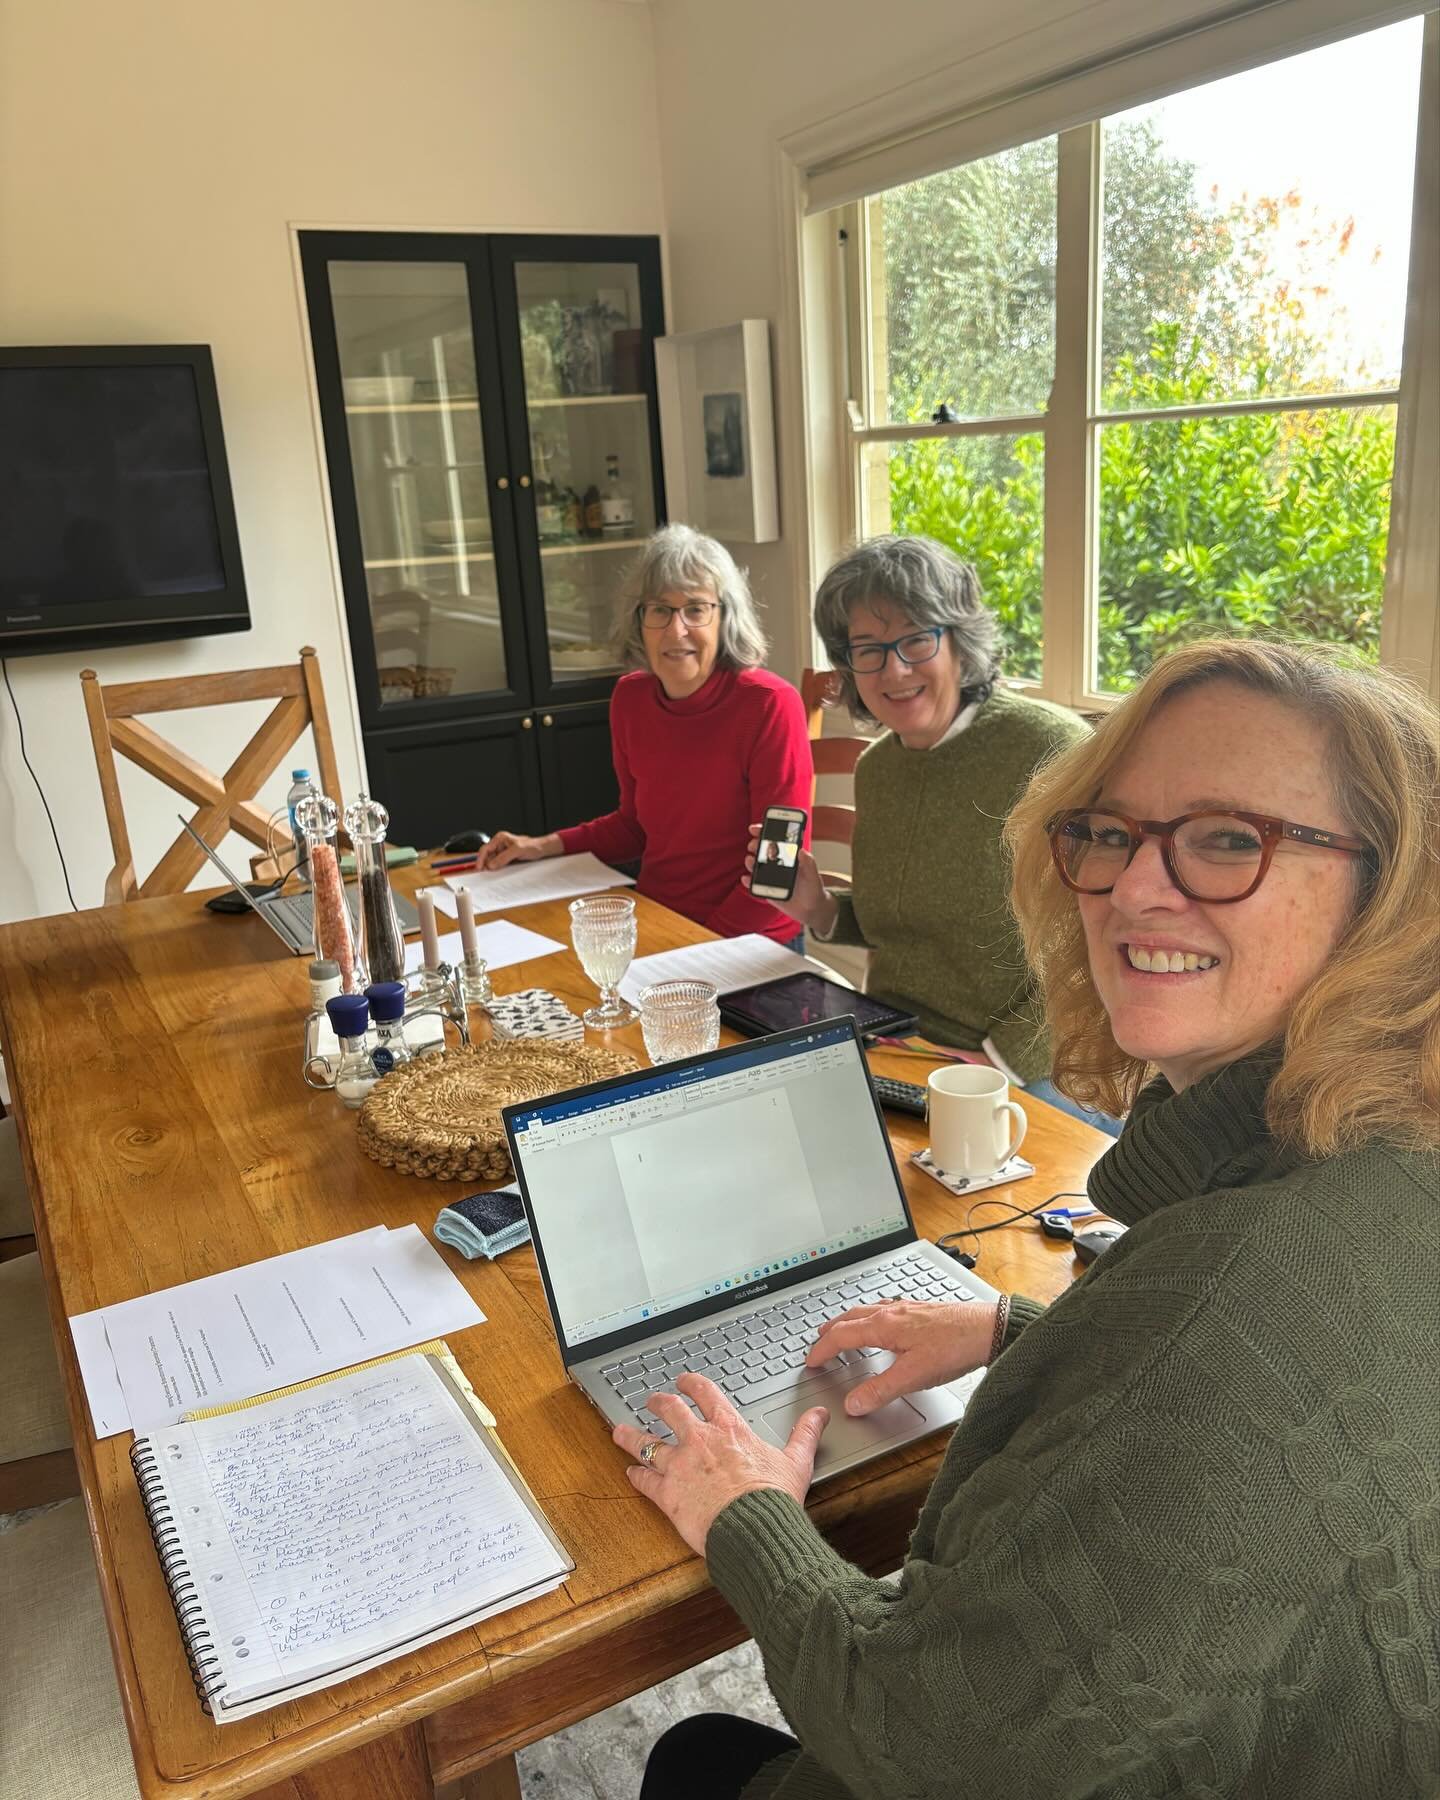 Well, that&rsquo;s a wrap on another great writers&rsquo; retreat. Four days of brainstorming, workshopping, writing, nerding out on books, eating chocolate cake, mimicry and LOLS. With Veronica Keating, Pauline O&rsquo;Carolan and @mary_wandering 🧡